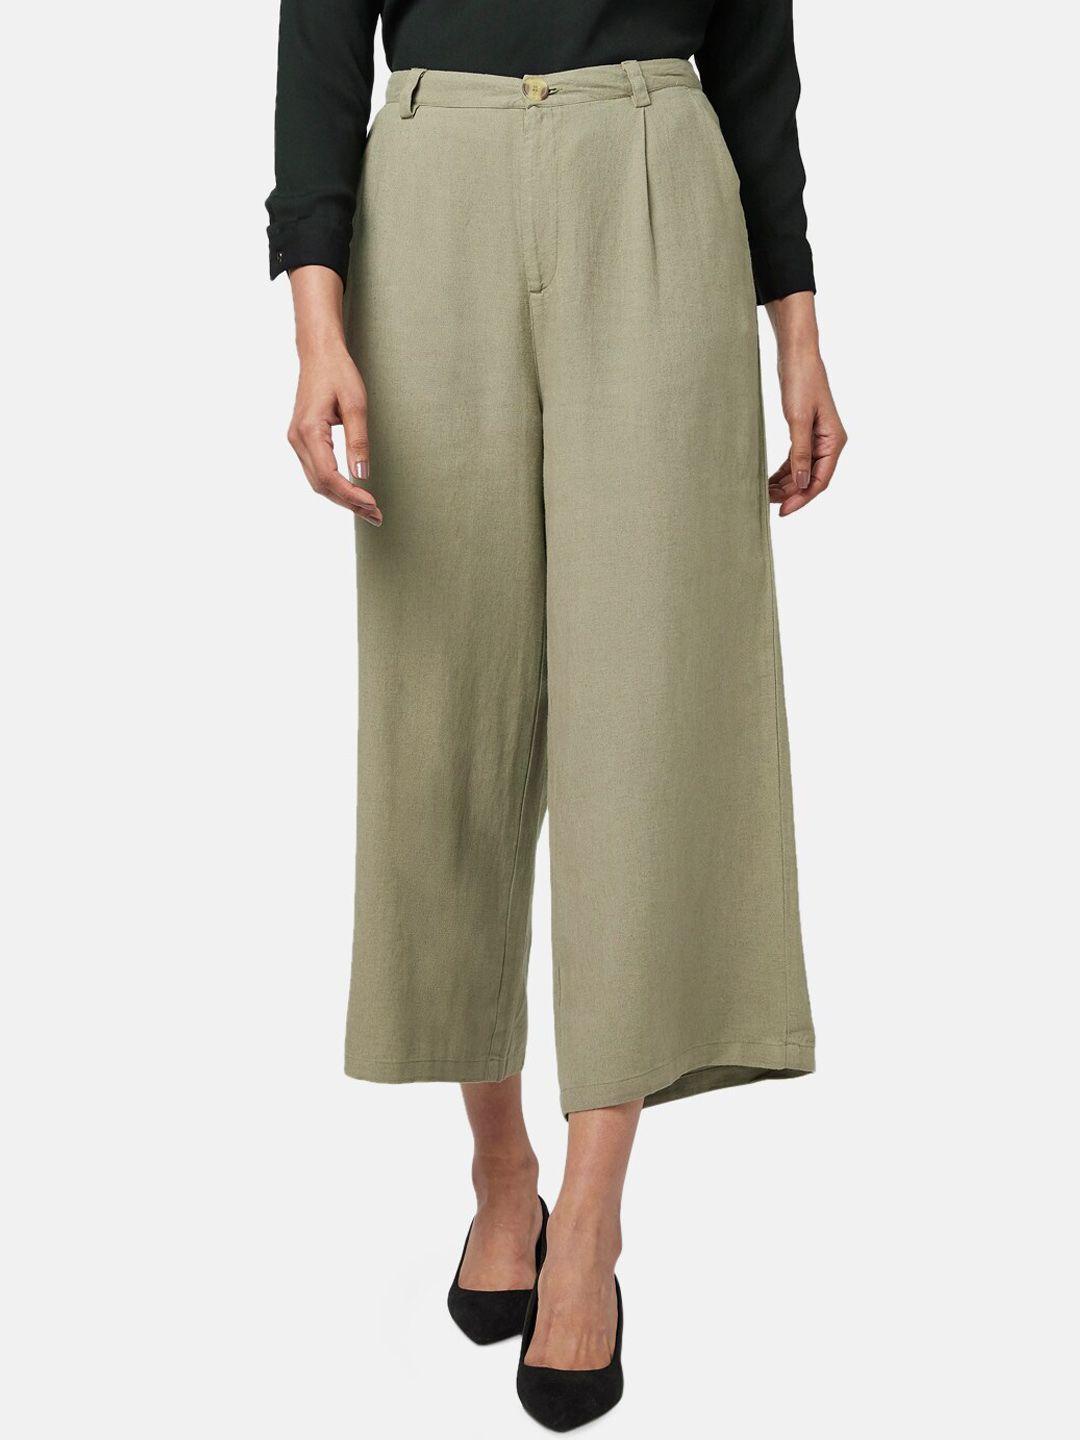 annabelle by pantaloons women olive green pleated culottes trousers